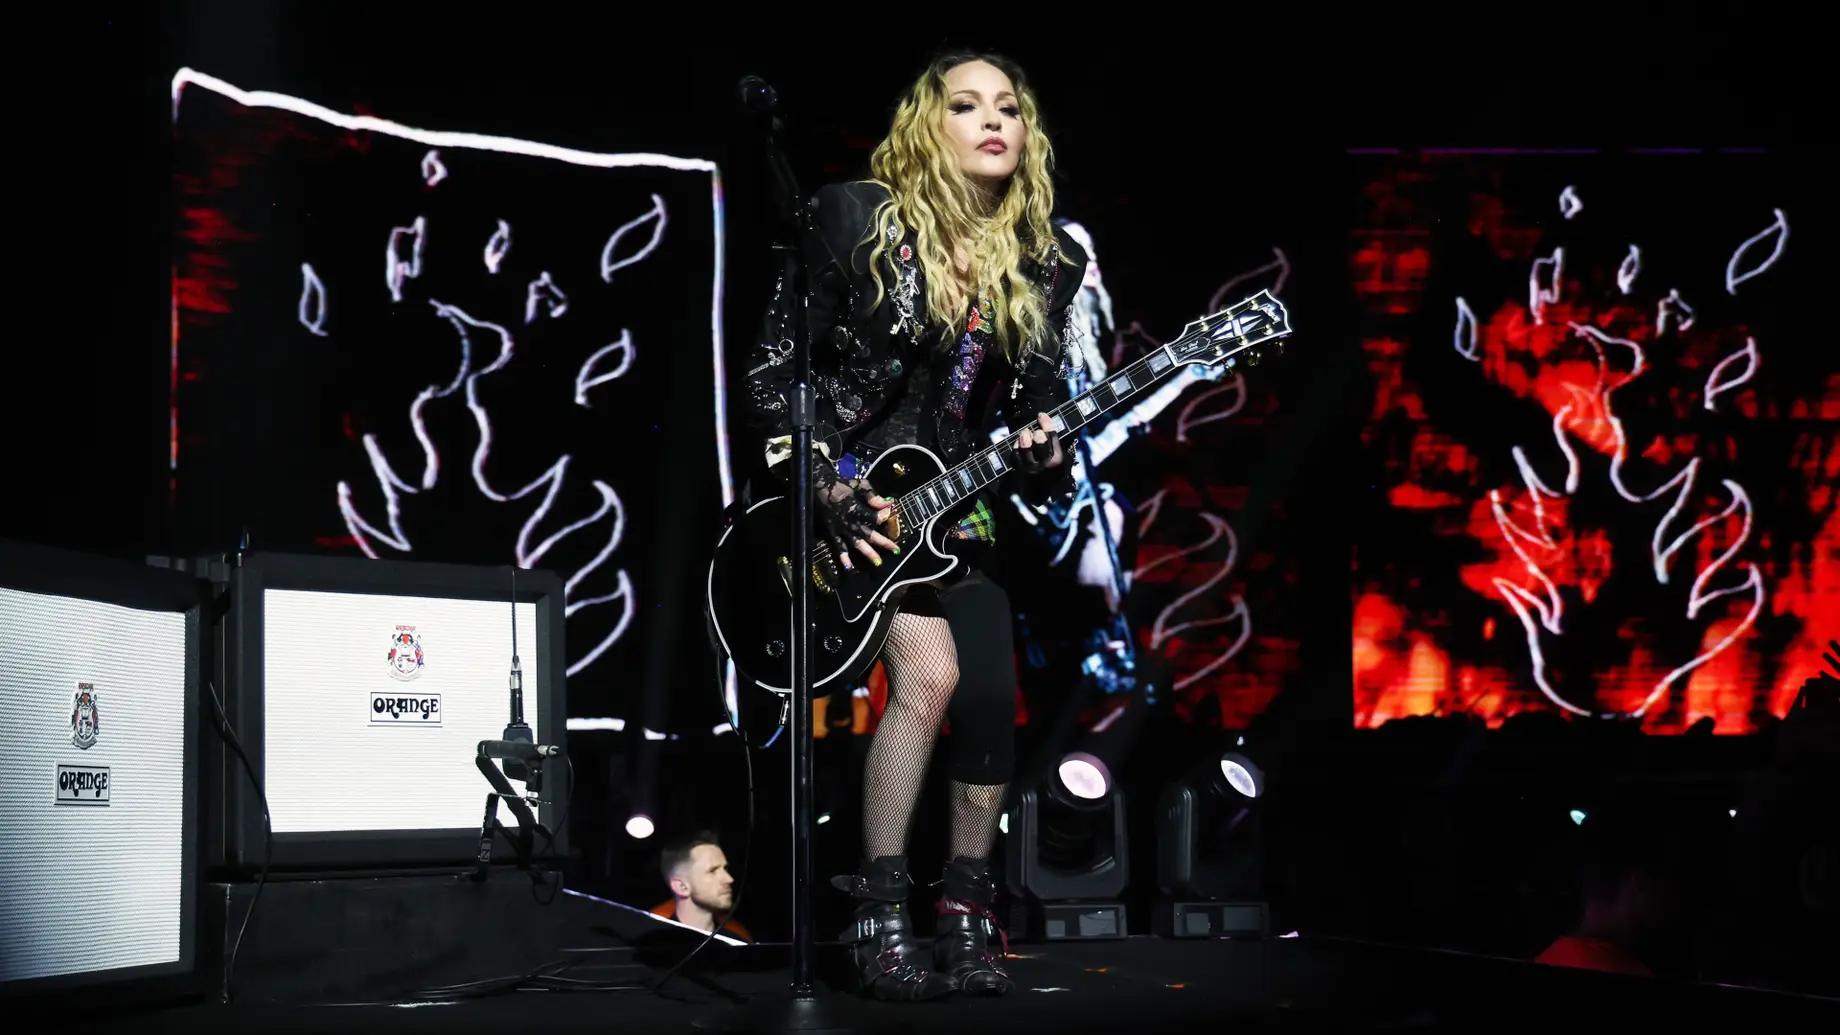 Madonna Fans Sue Over Explicit Tour Performances That Were Like ‘Watching Porn Without a Warning’